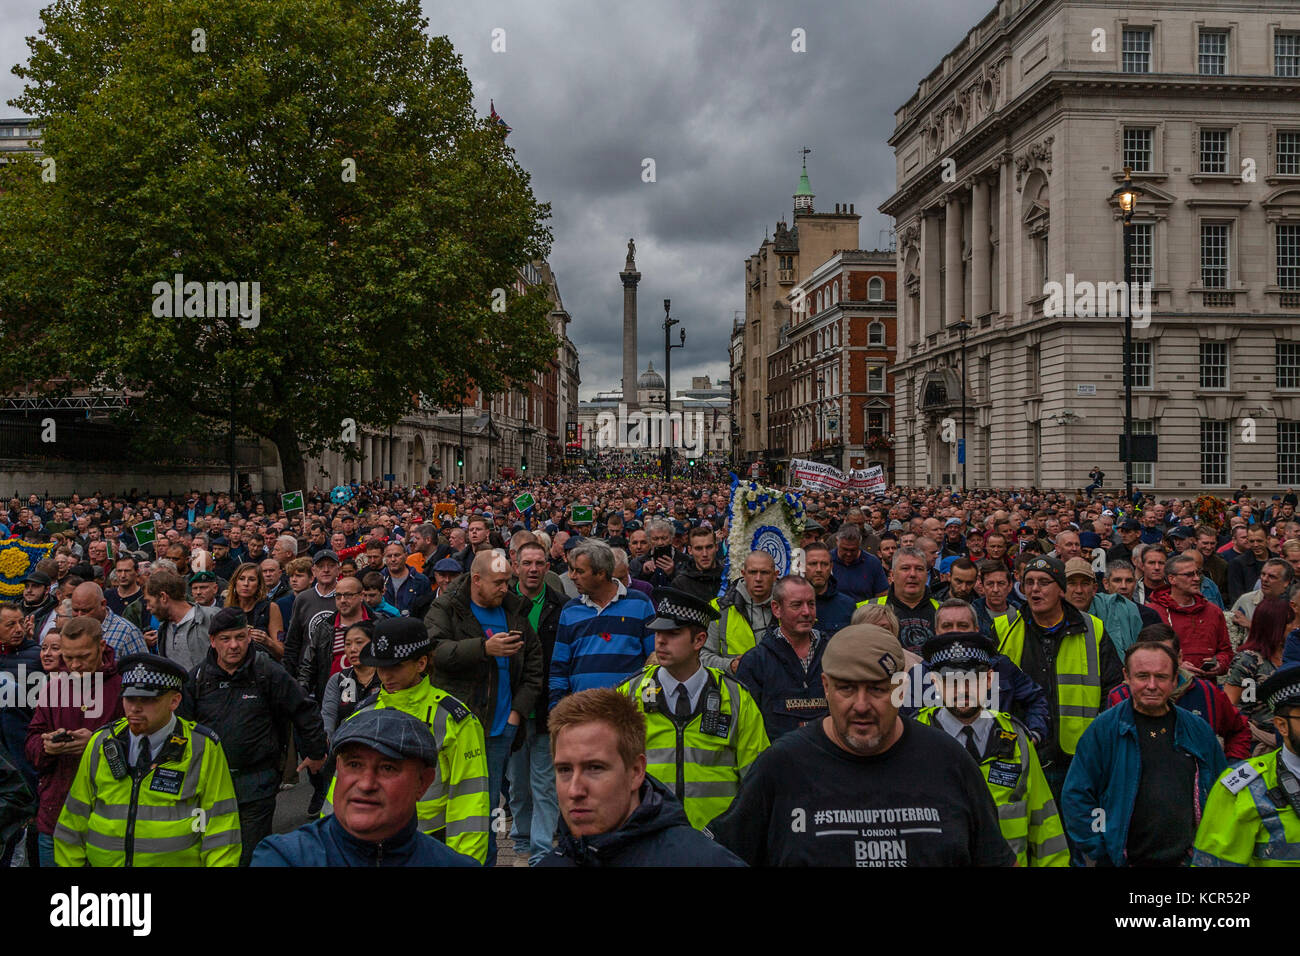 London, UK. 7th October 2017. Football fans from across the Uk march against extremism under the banner of the FLA (football lads alliance) Credit: Grant Rooney/Alamy Live News Stock Photo